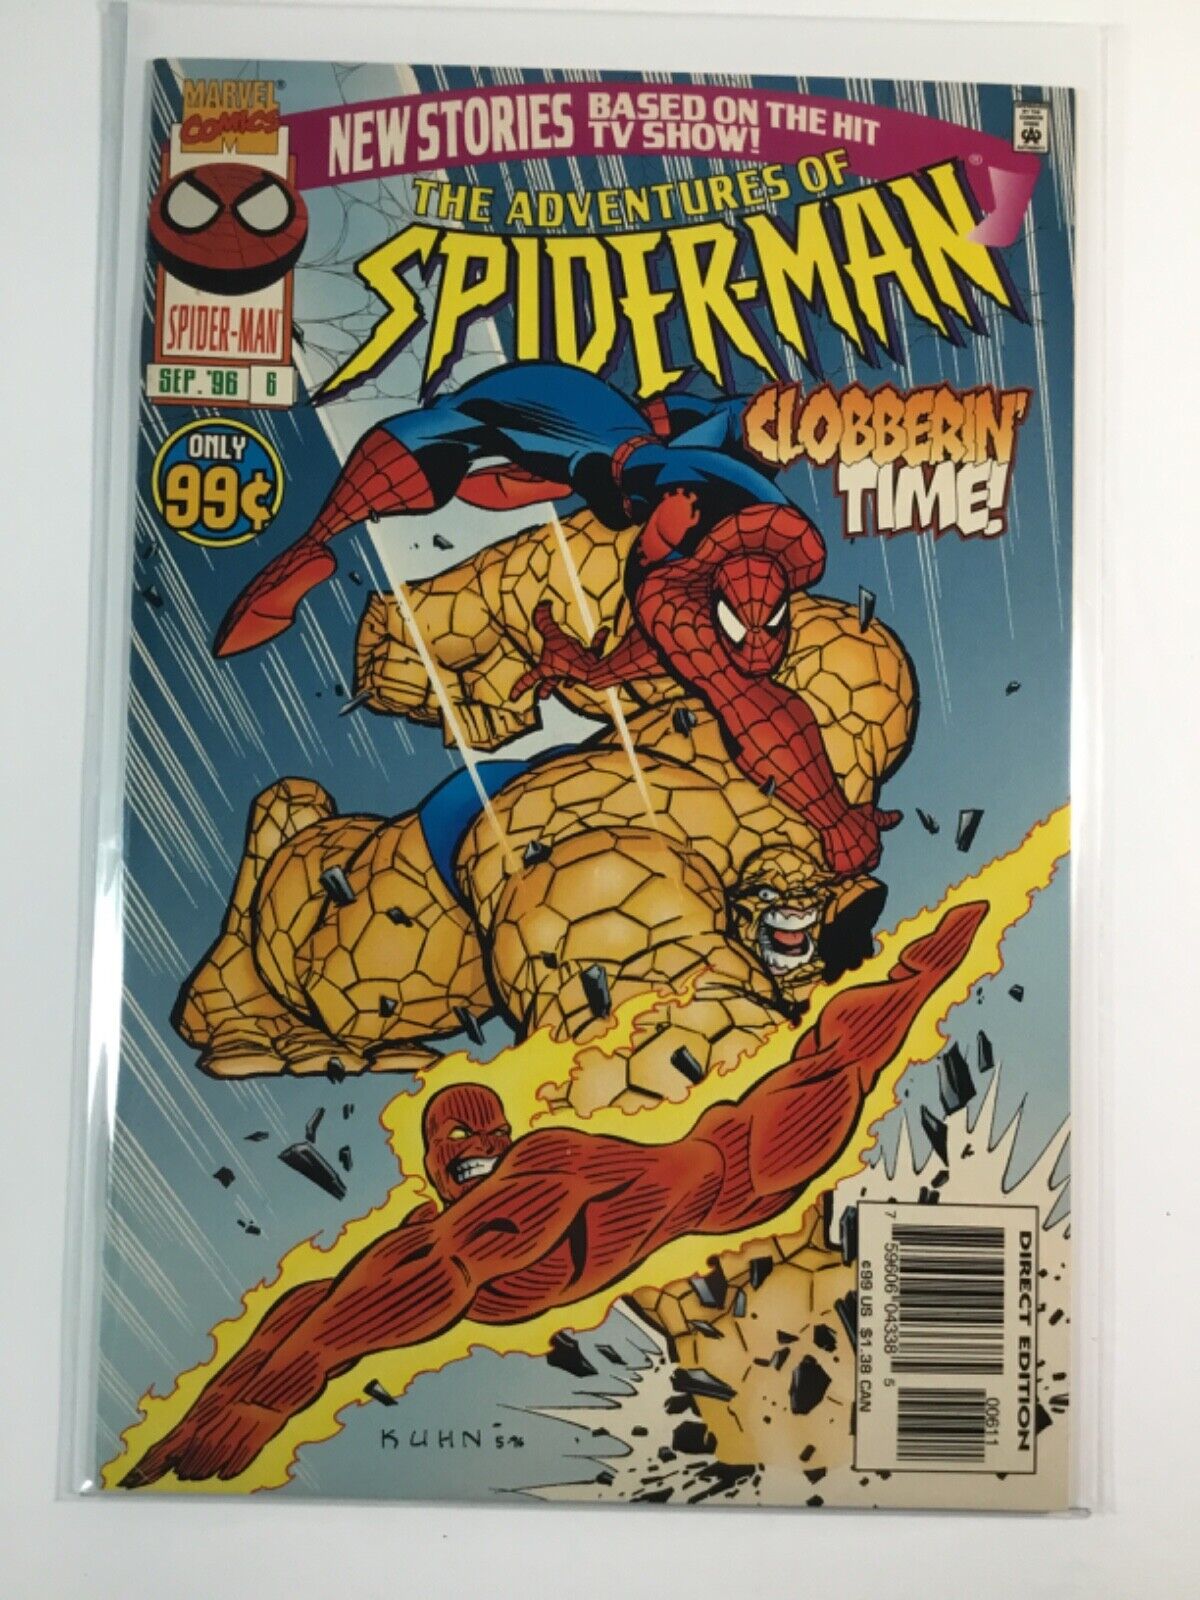 ADVENTURES OF SPIDER-MAN (1996) #6 VF- 7.5 COVER BY THE MULTI-TALENTED ANDY KUHN